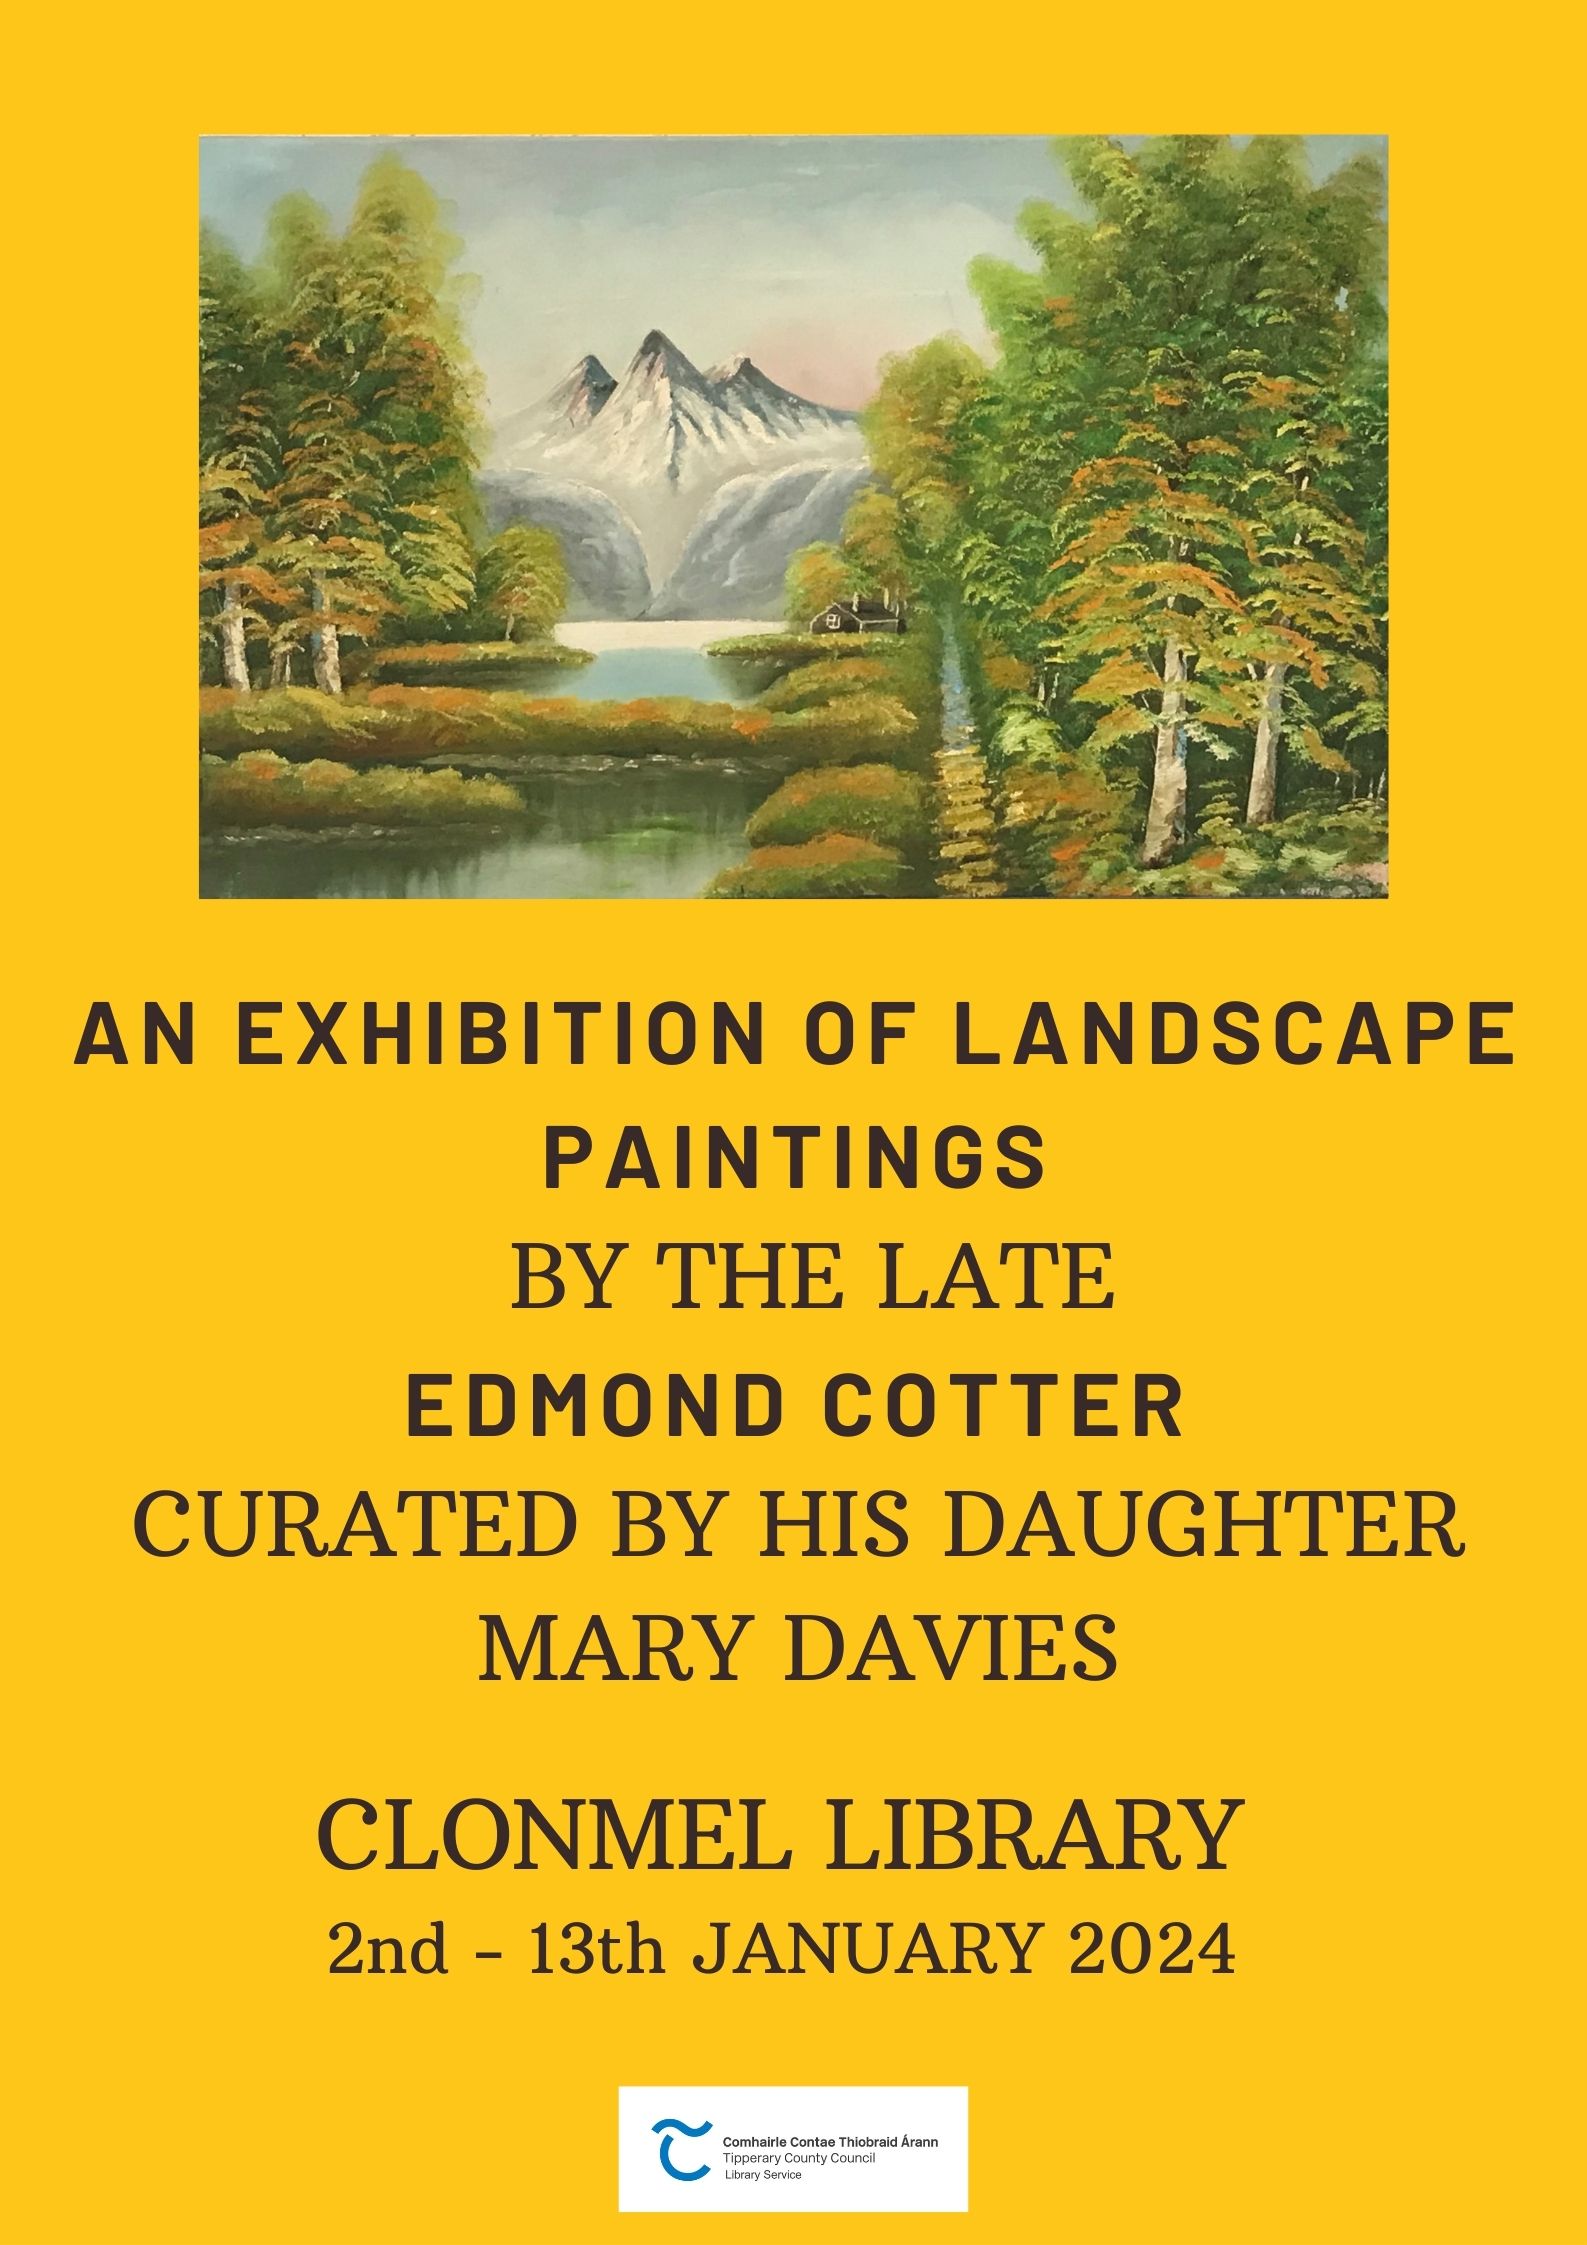 poster for exhibition of paintings by Edmond Cotter in clonmel library